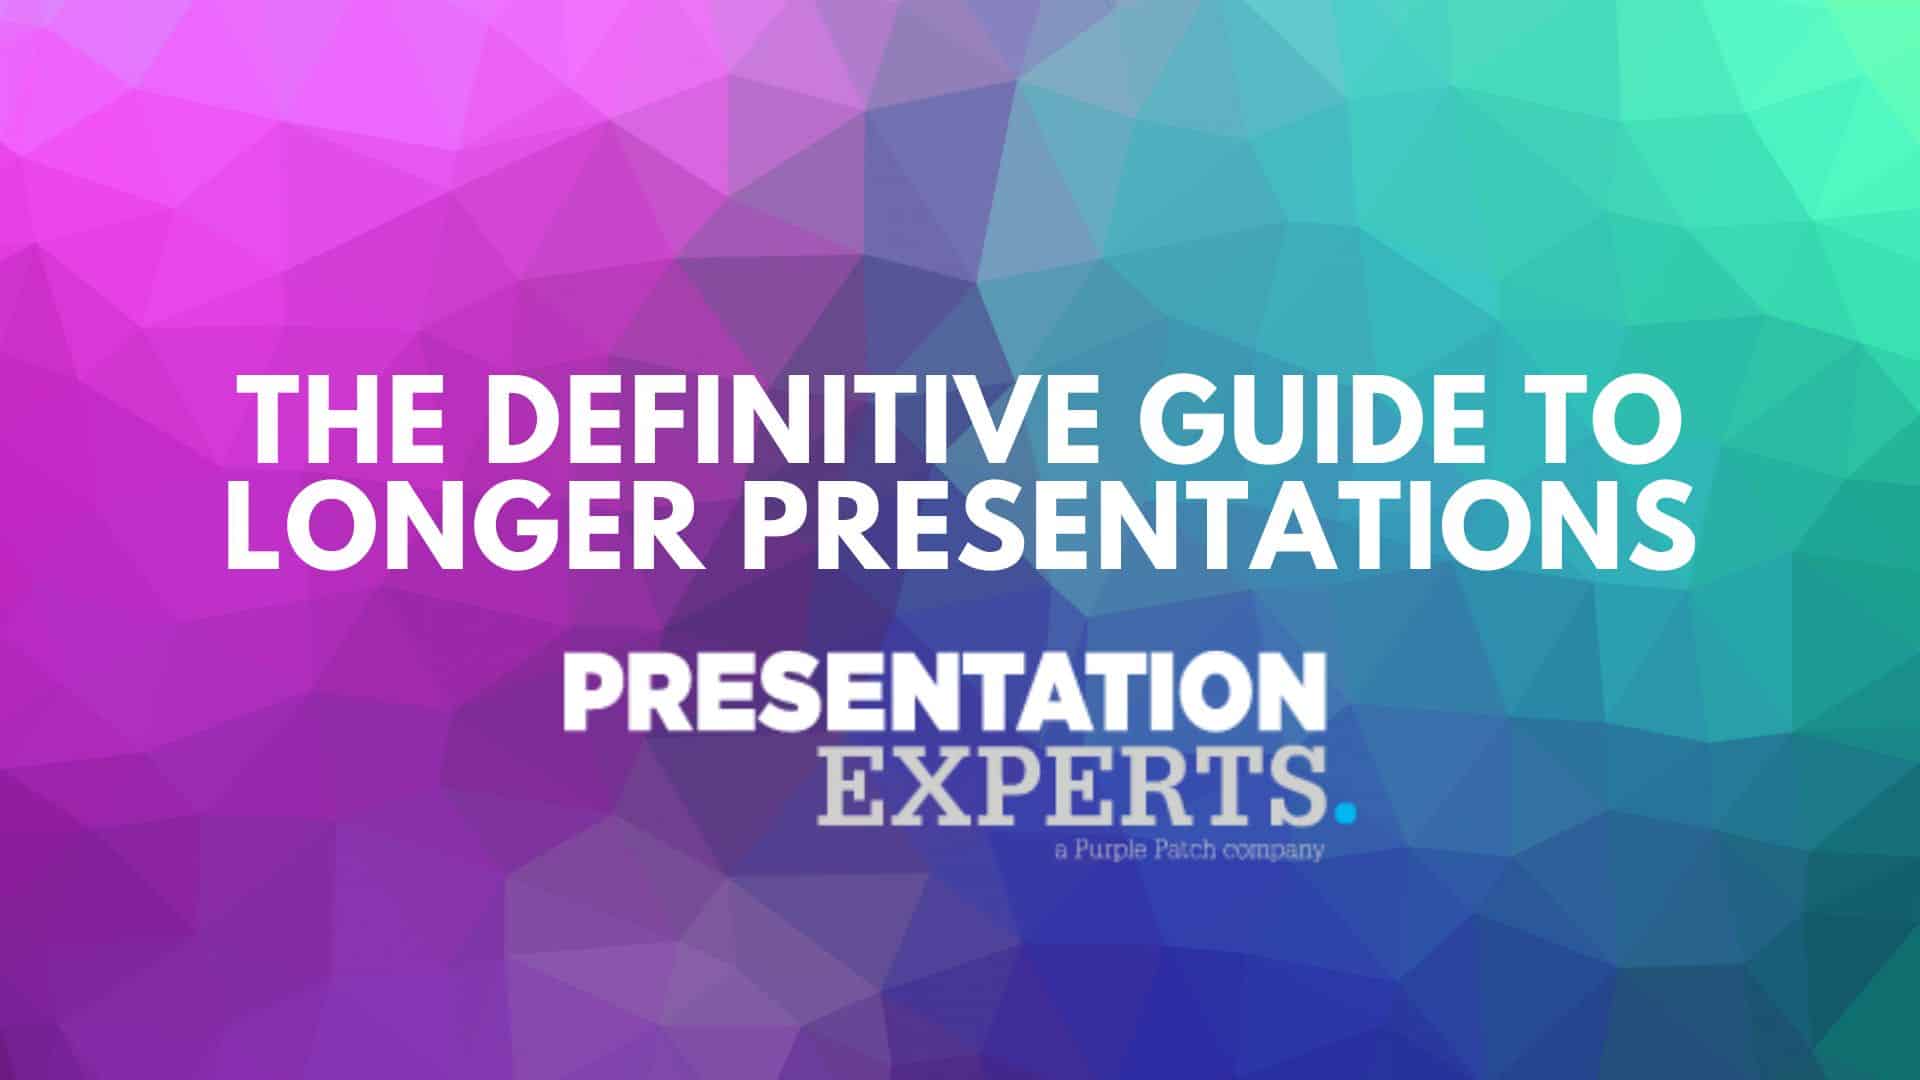 The Definitive Guide to Longer Presentations